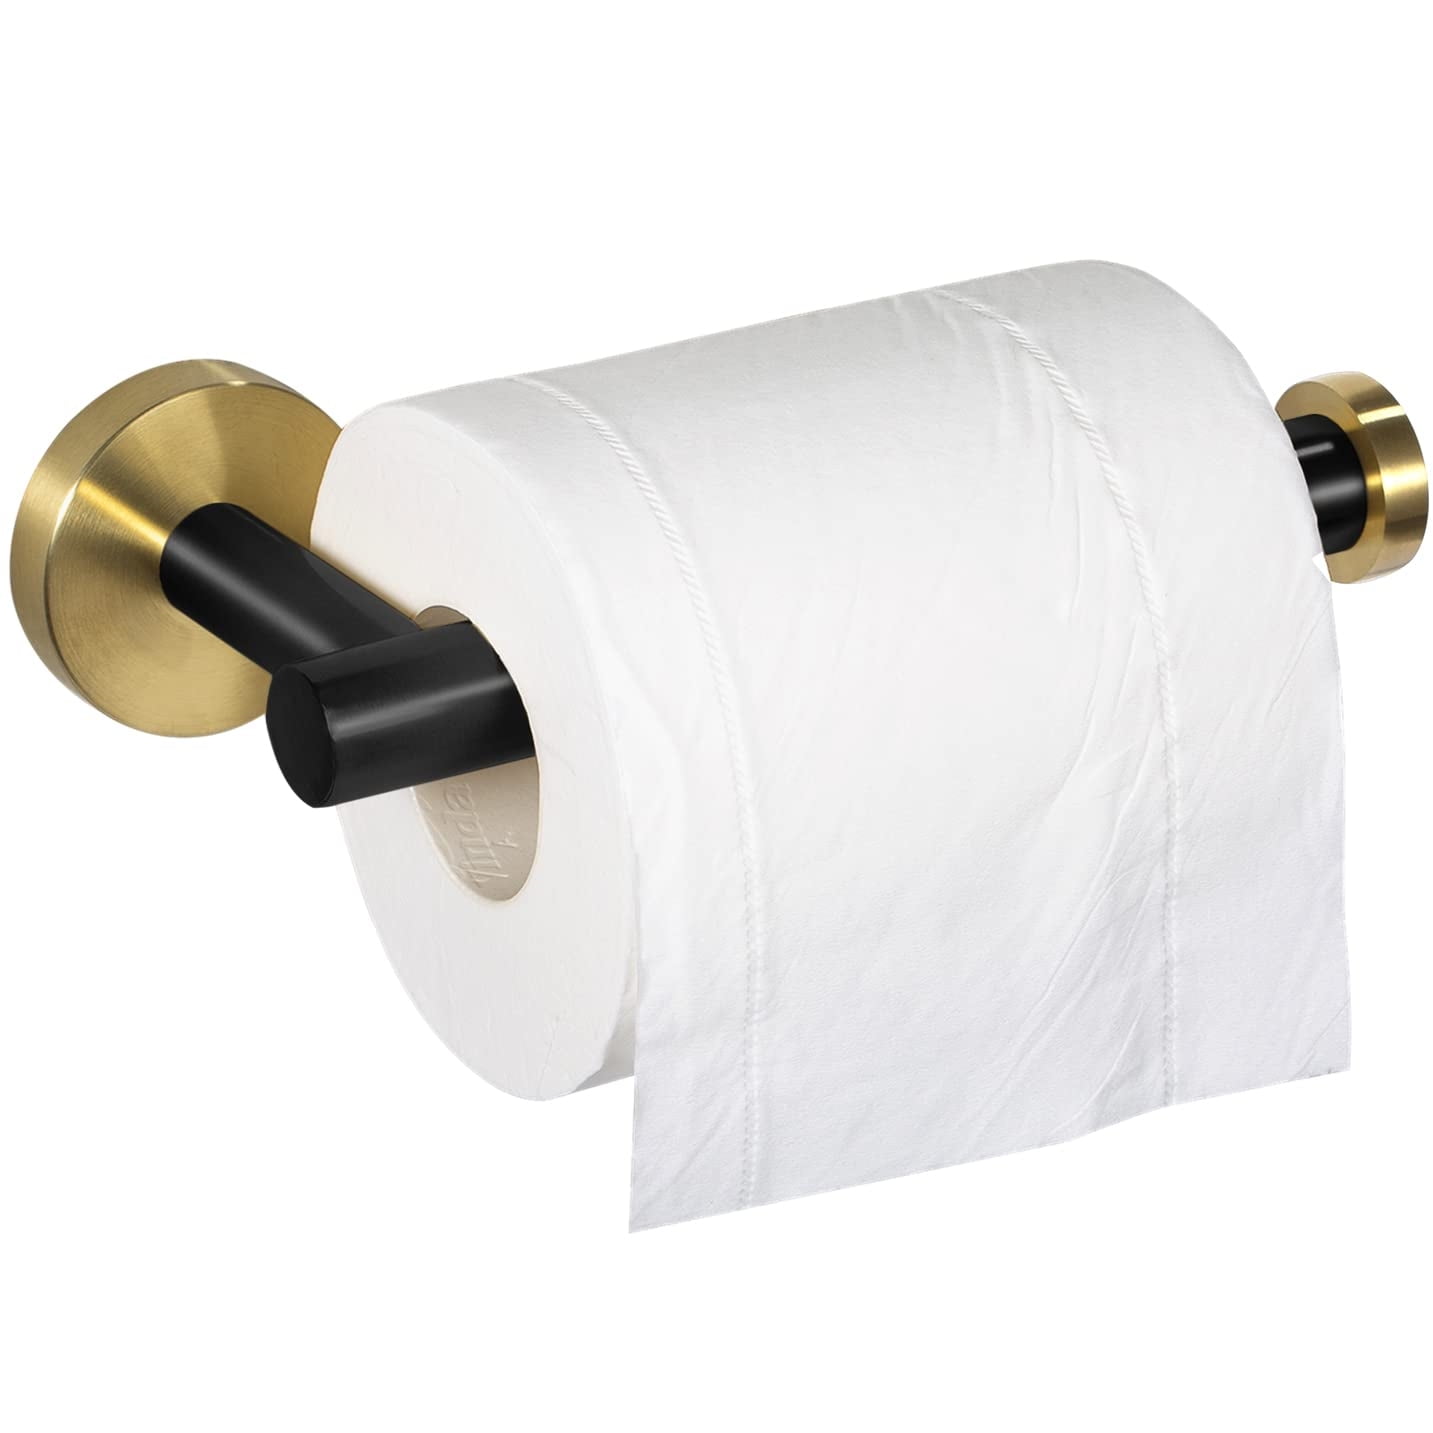 Toilet Paper Holder Black and Gold SUS304 Stainless Steel Toilet Roll Holder  for Bathroom, Kitchen, Washroom Wall Mount with Adhesive Razor Hook - Black  